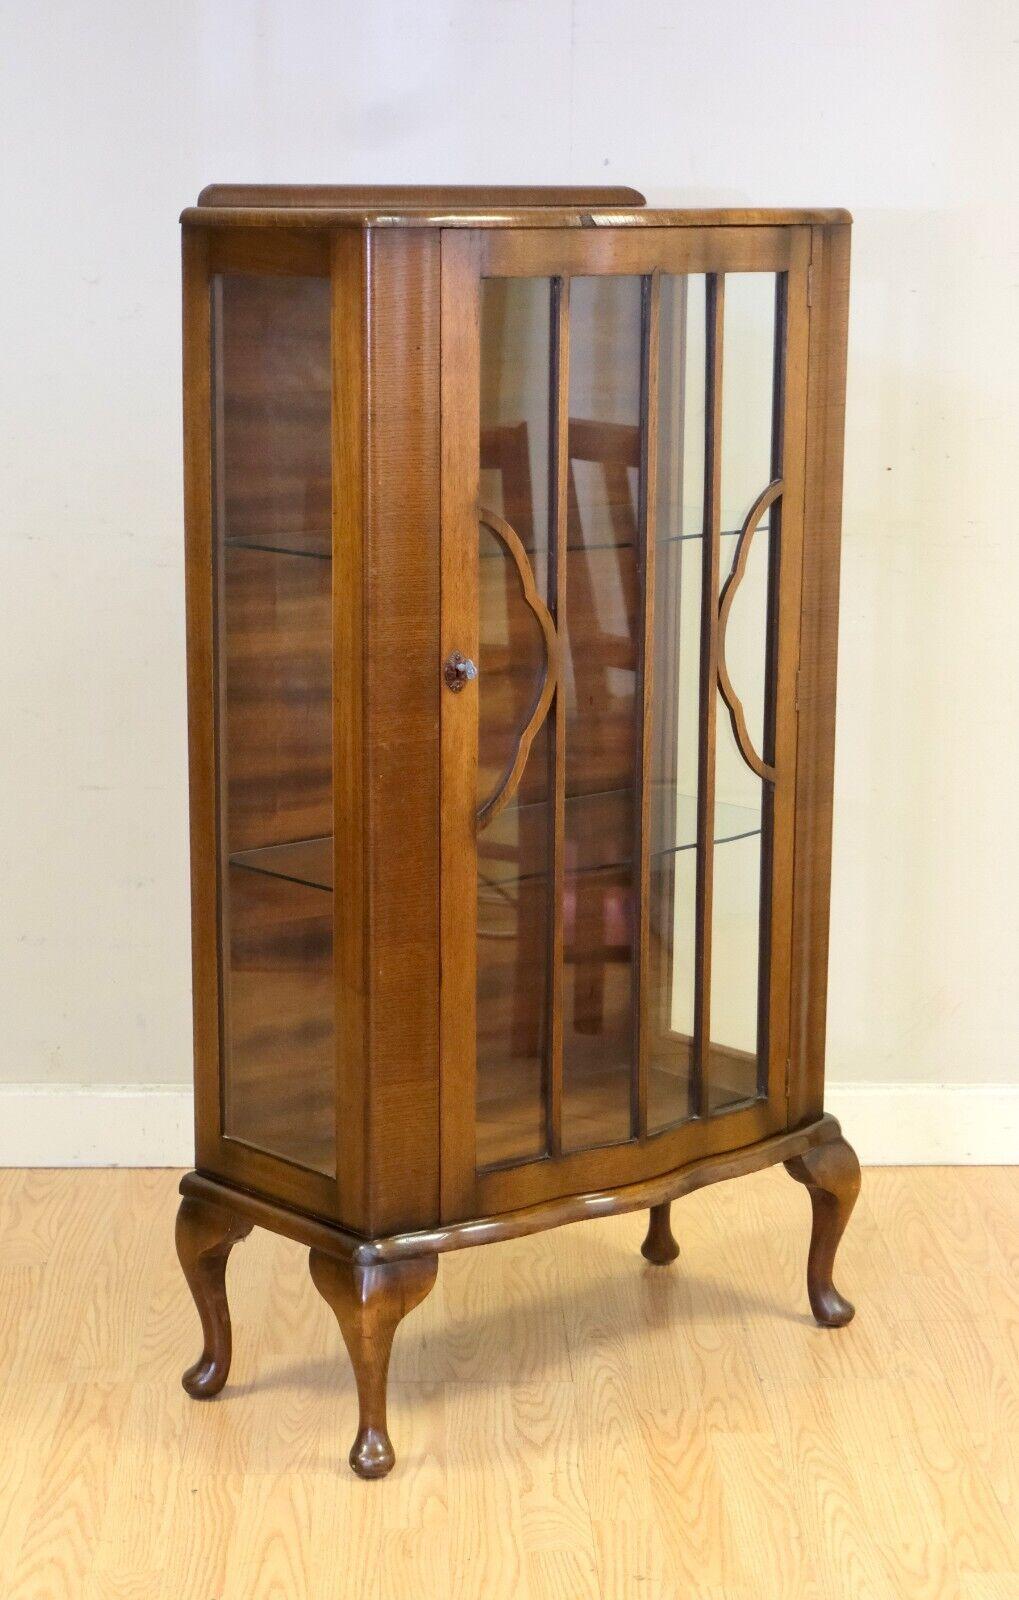 20th Century SMALL GORGEOUS WALNUT GLAZED BOOKCASE WiTH GLASS SHELVES ON QUEEN ANN STYLE LEGS For Sale